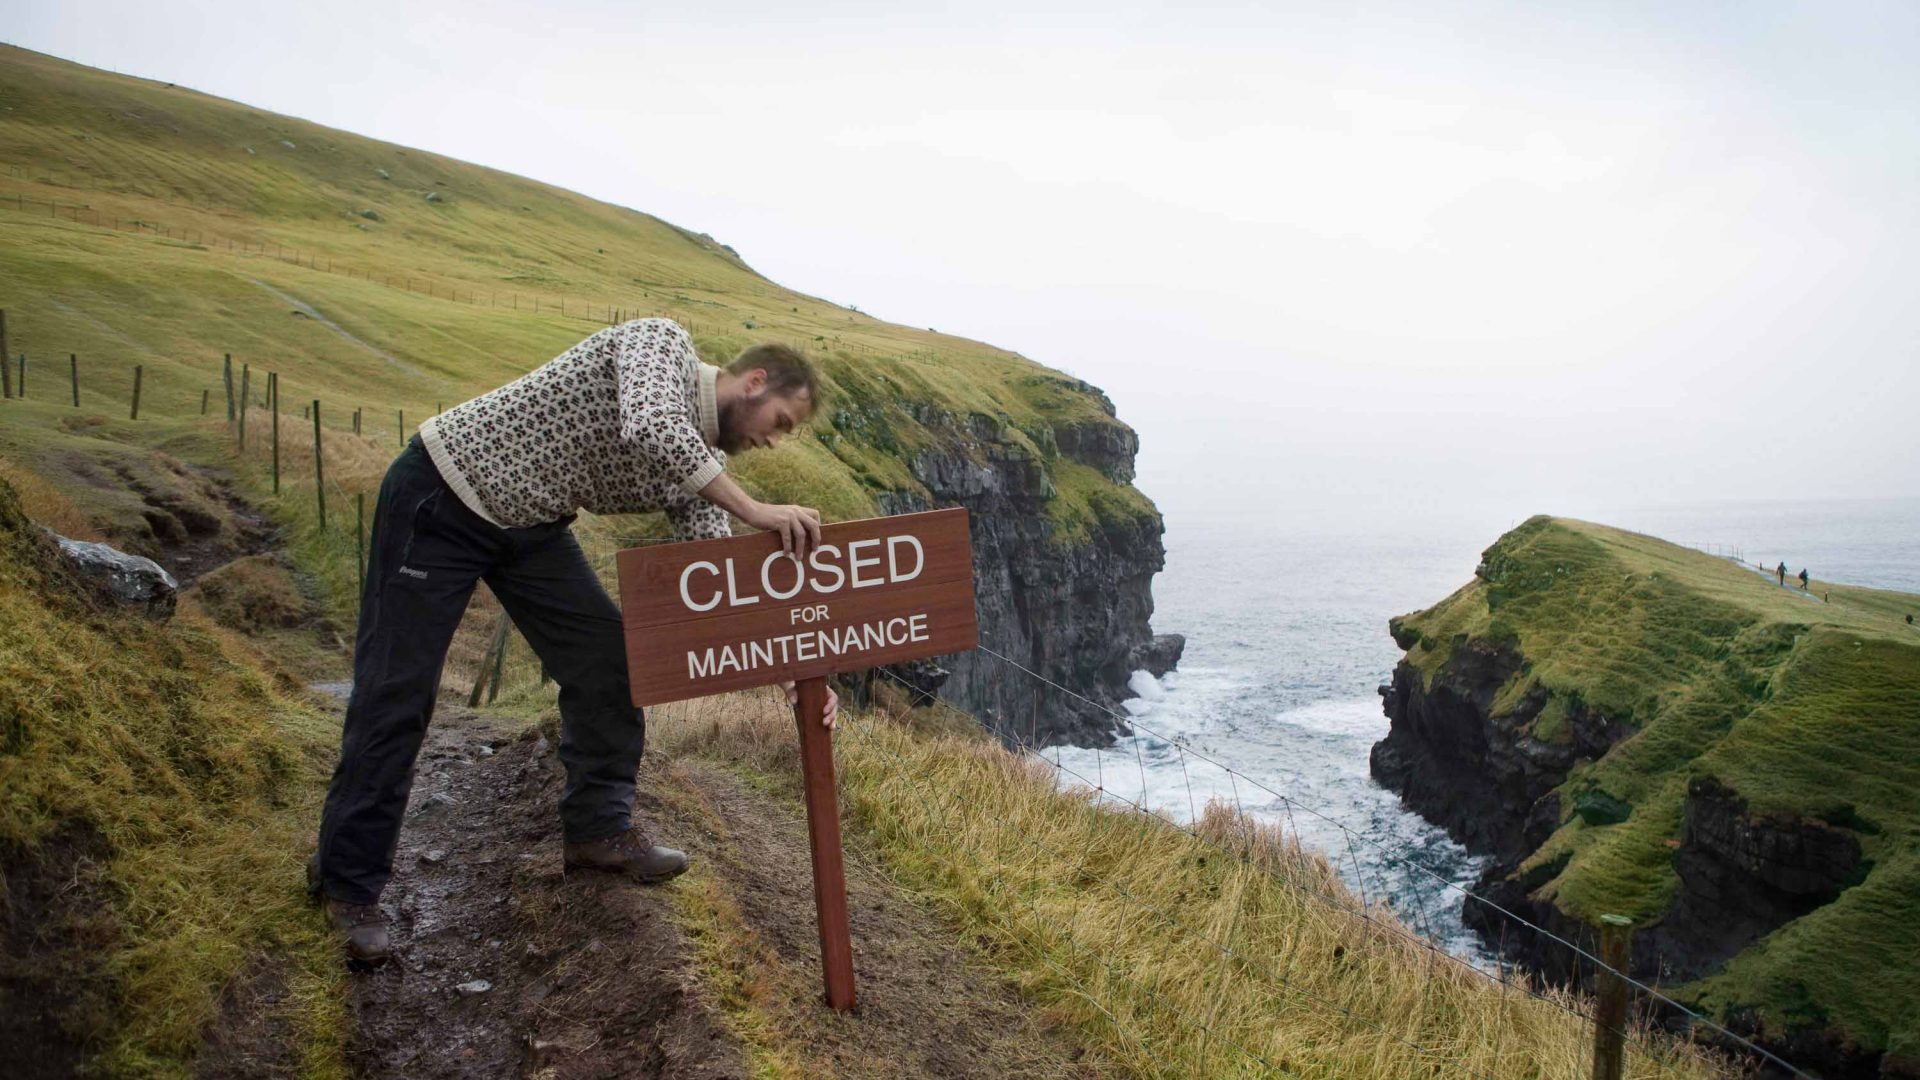 A man pushes a Closed for Maintenance sign into the ground.